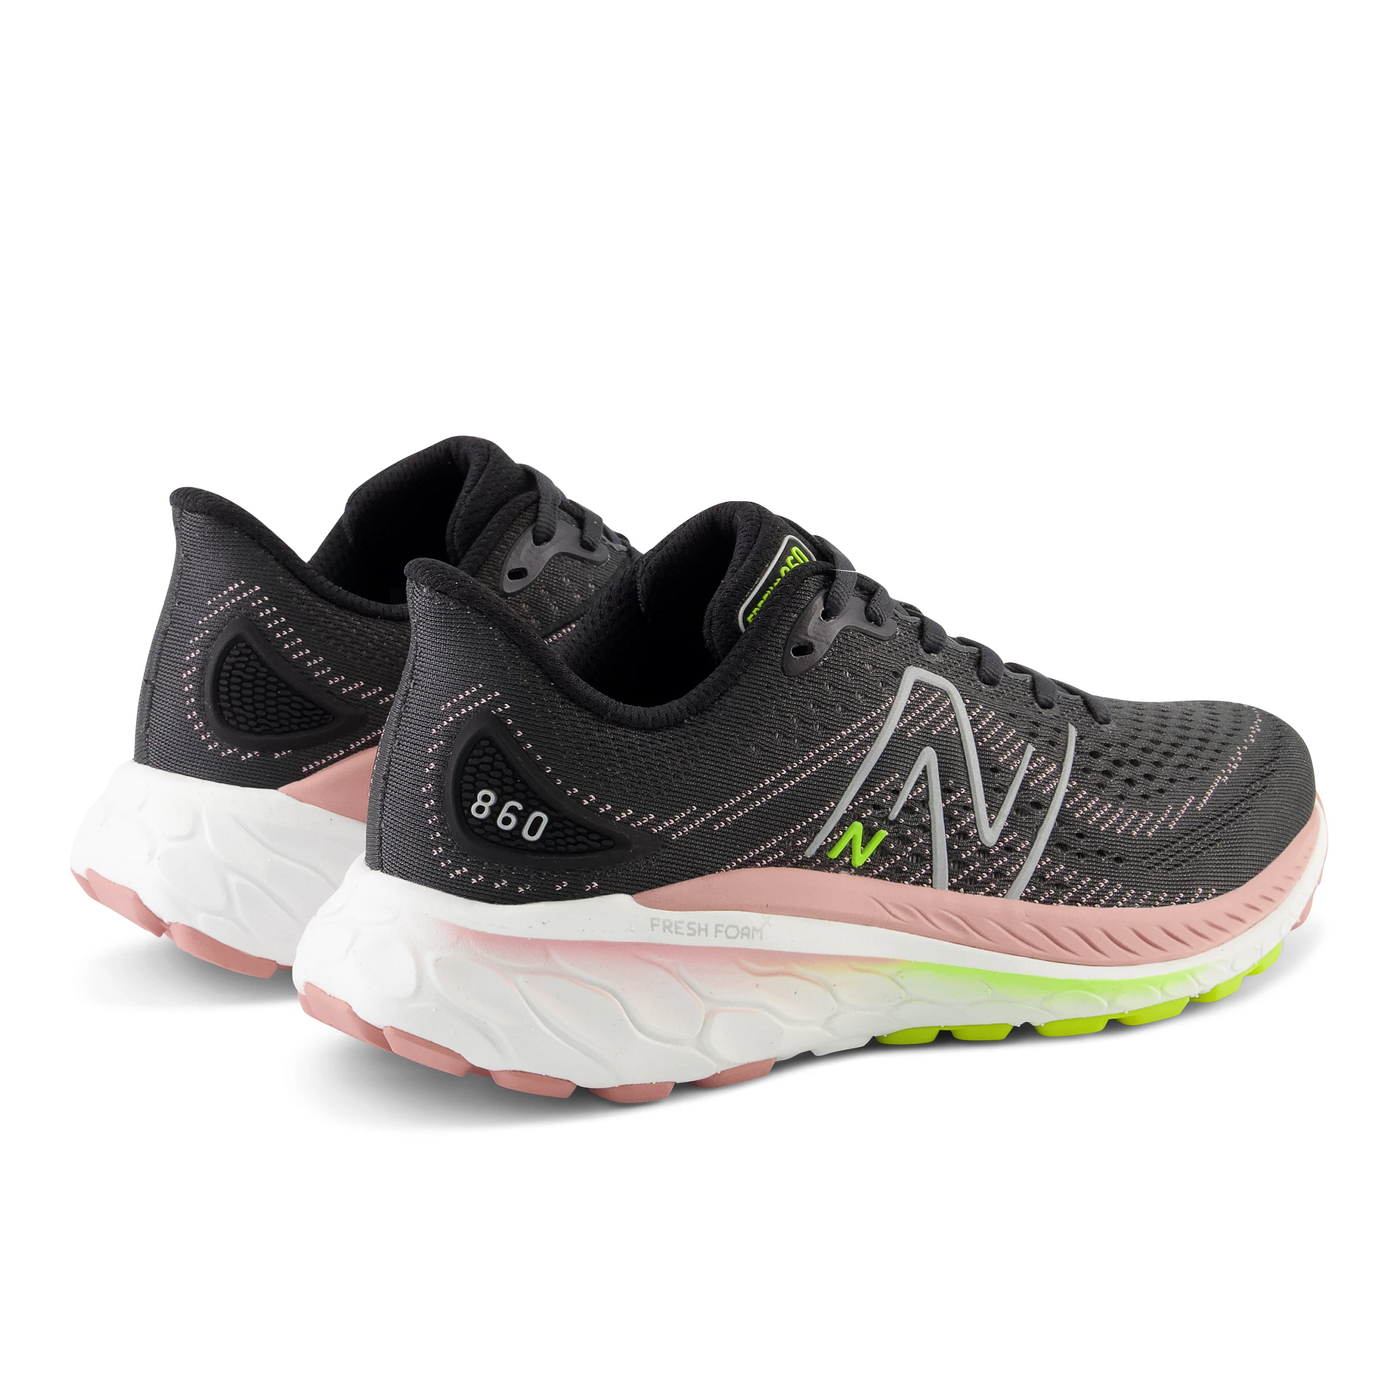 New Balance Womens 860v13 Wide - D Width - Black/Pink Moon - Stability